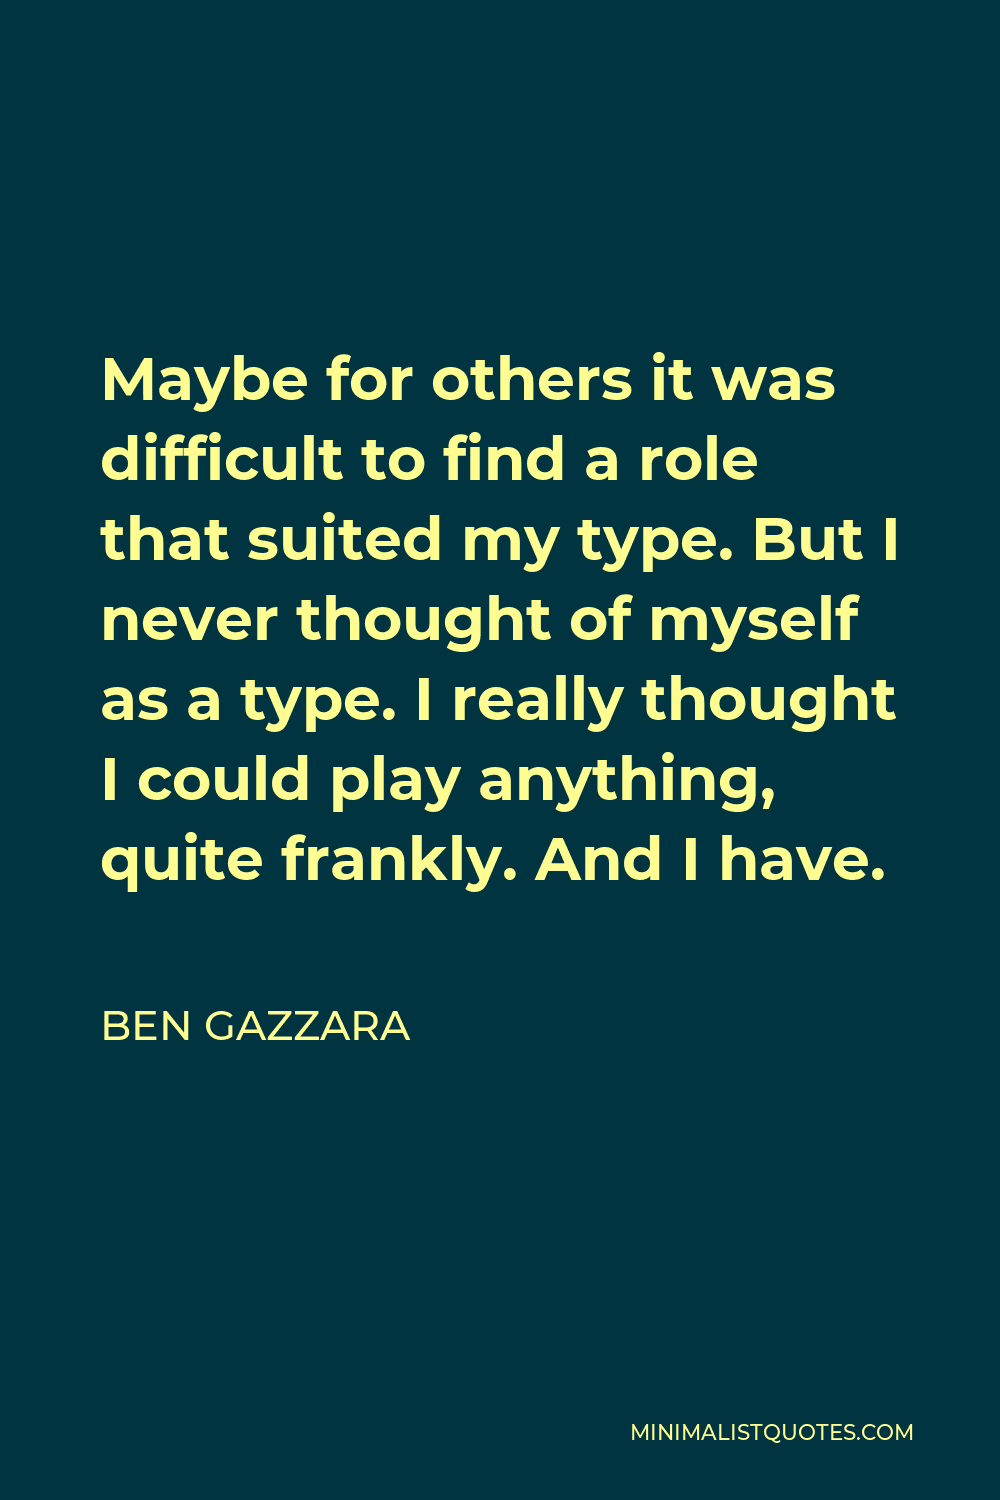 Ben Gazzara Quote - Maybe for others it was difficult to find a role that suited my type. But I never thought of myself as a type. I really thought I could play anything, quite frankly. And I have.